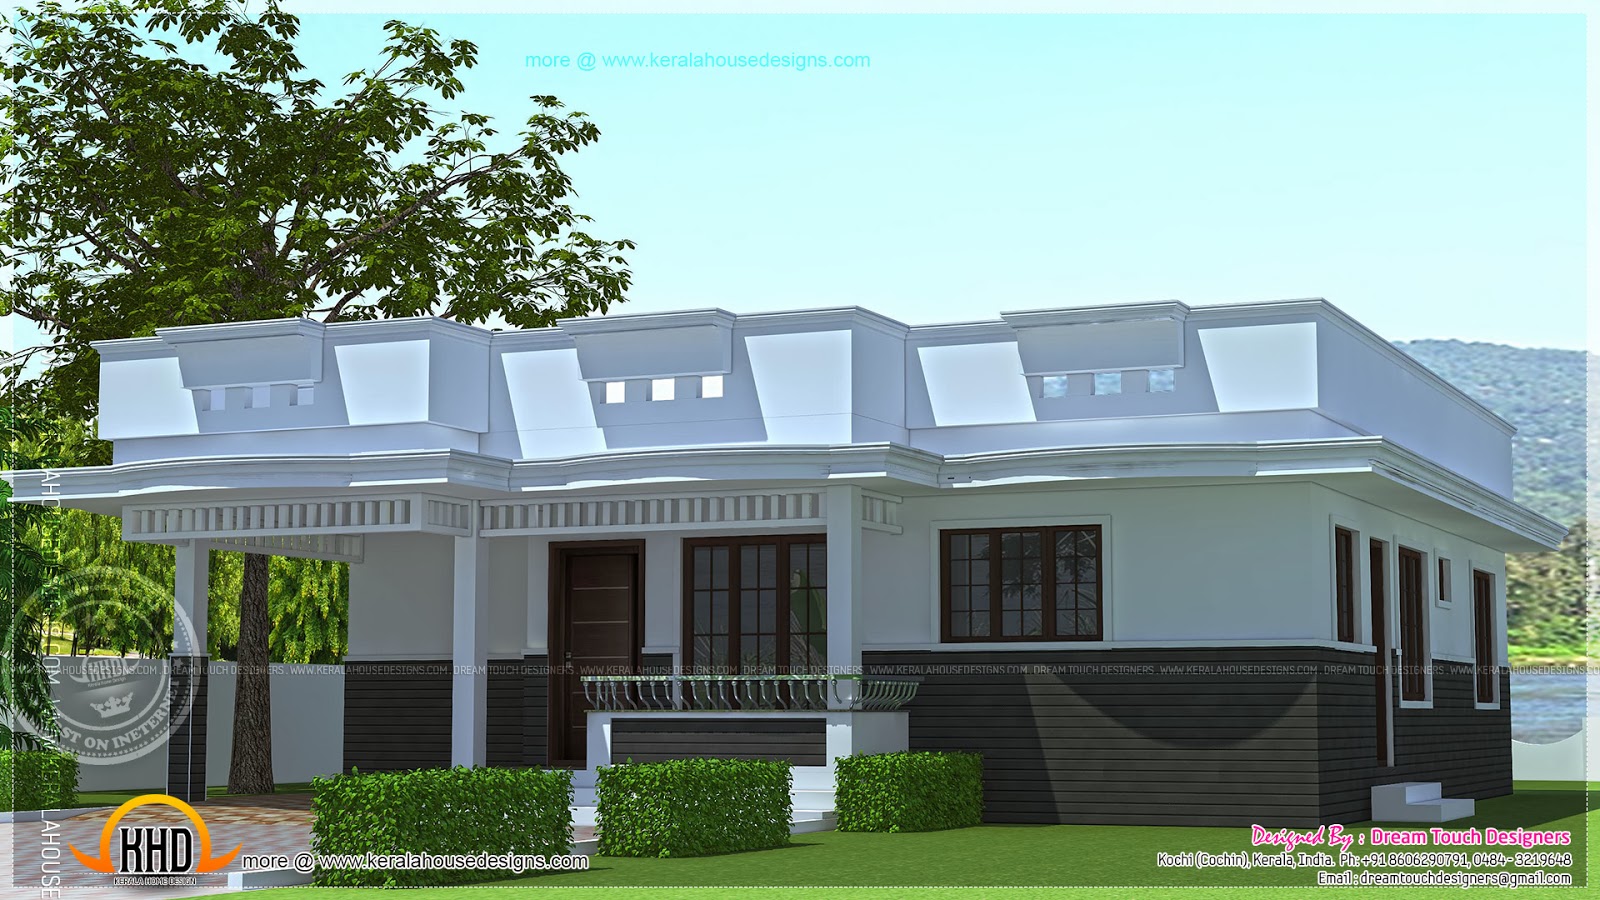 Single floor house design in 1250 square feet - Kerala home design and